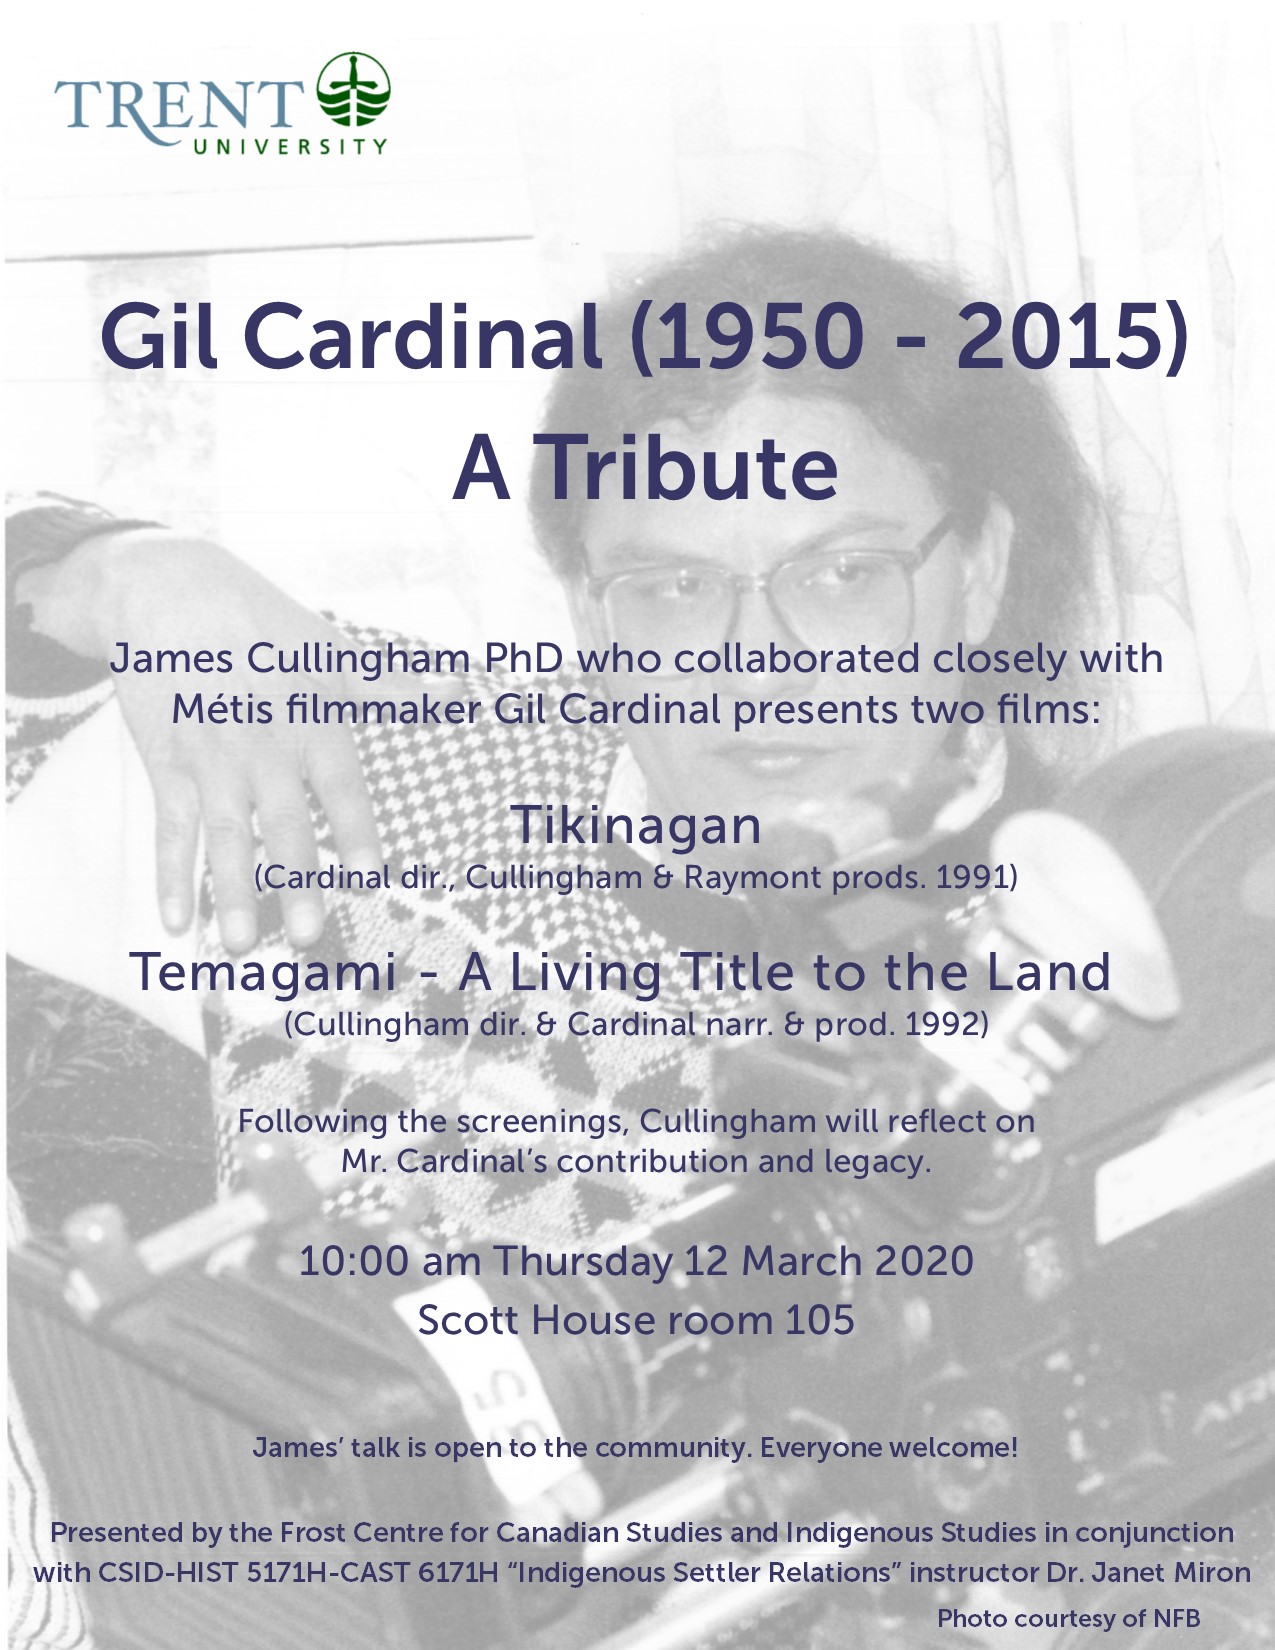 "Gil Cardinal (1950-2015) A Tribute" 12 March 2020 with James Cullingham